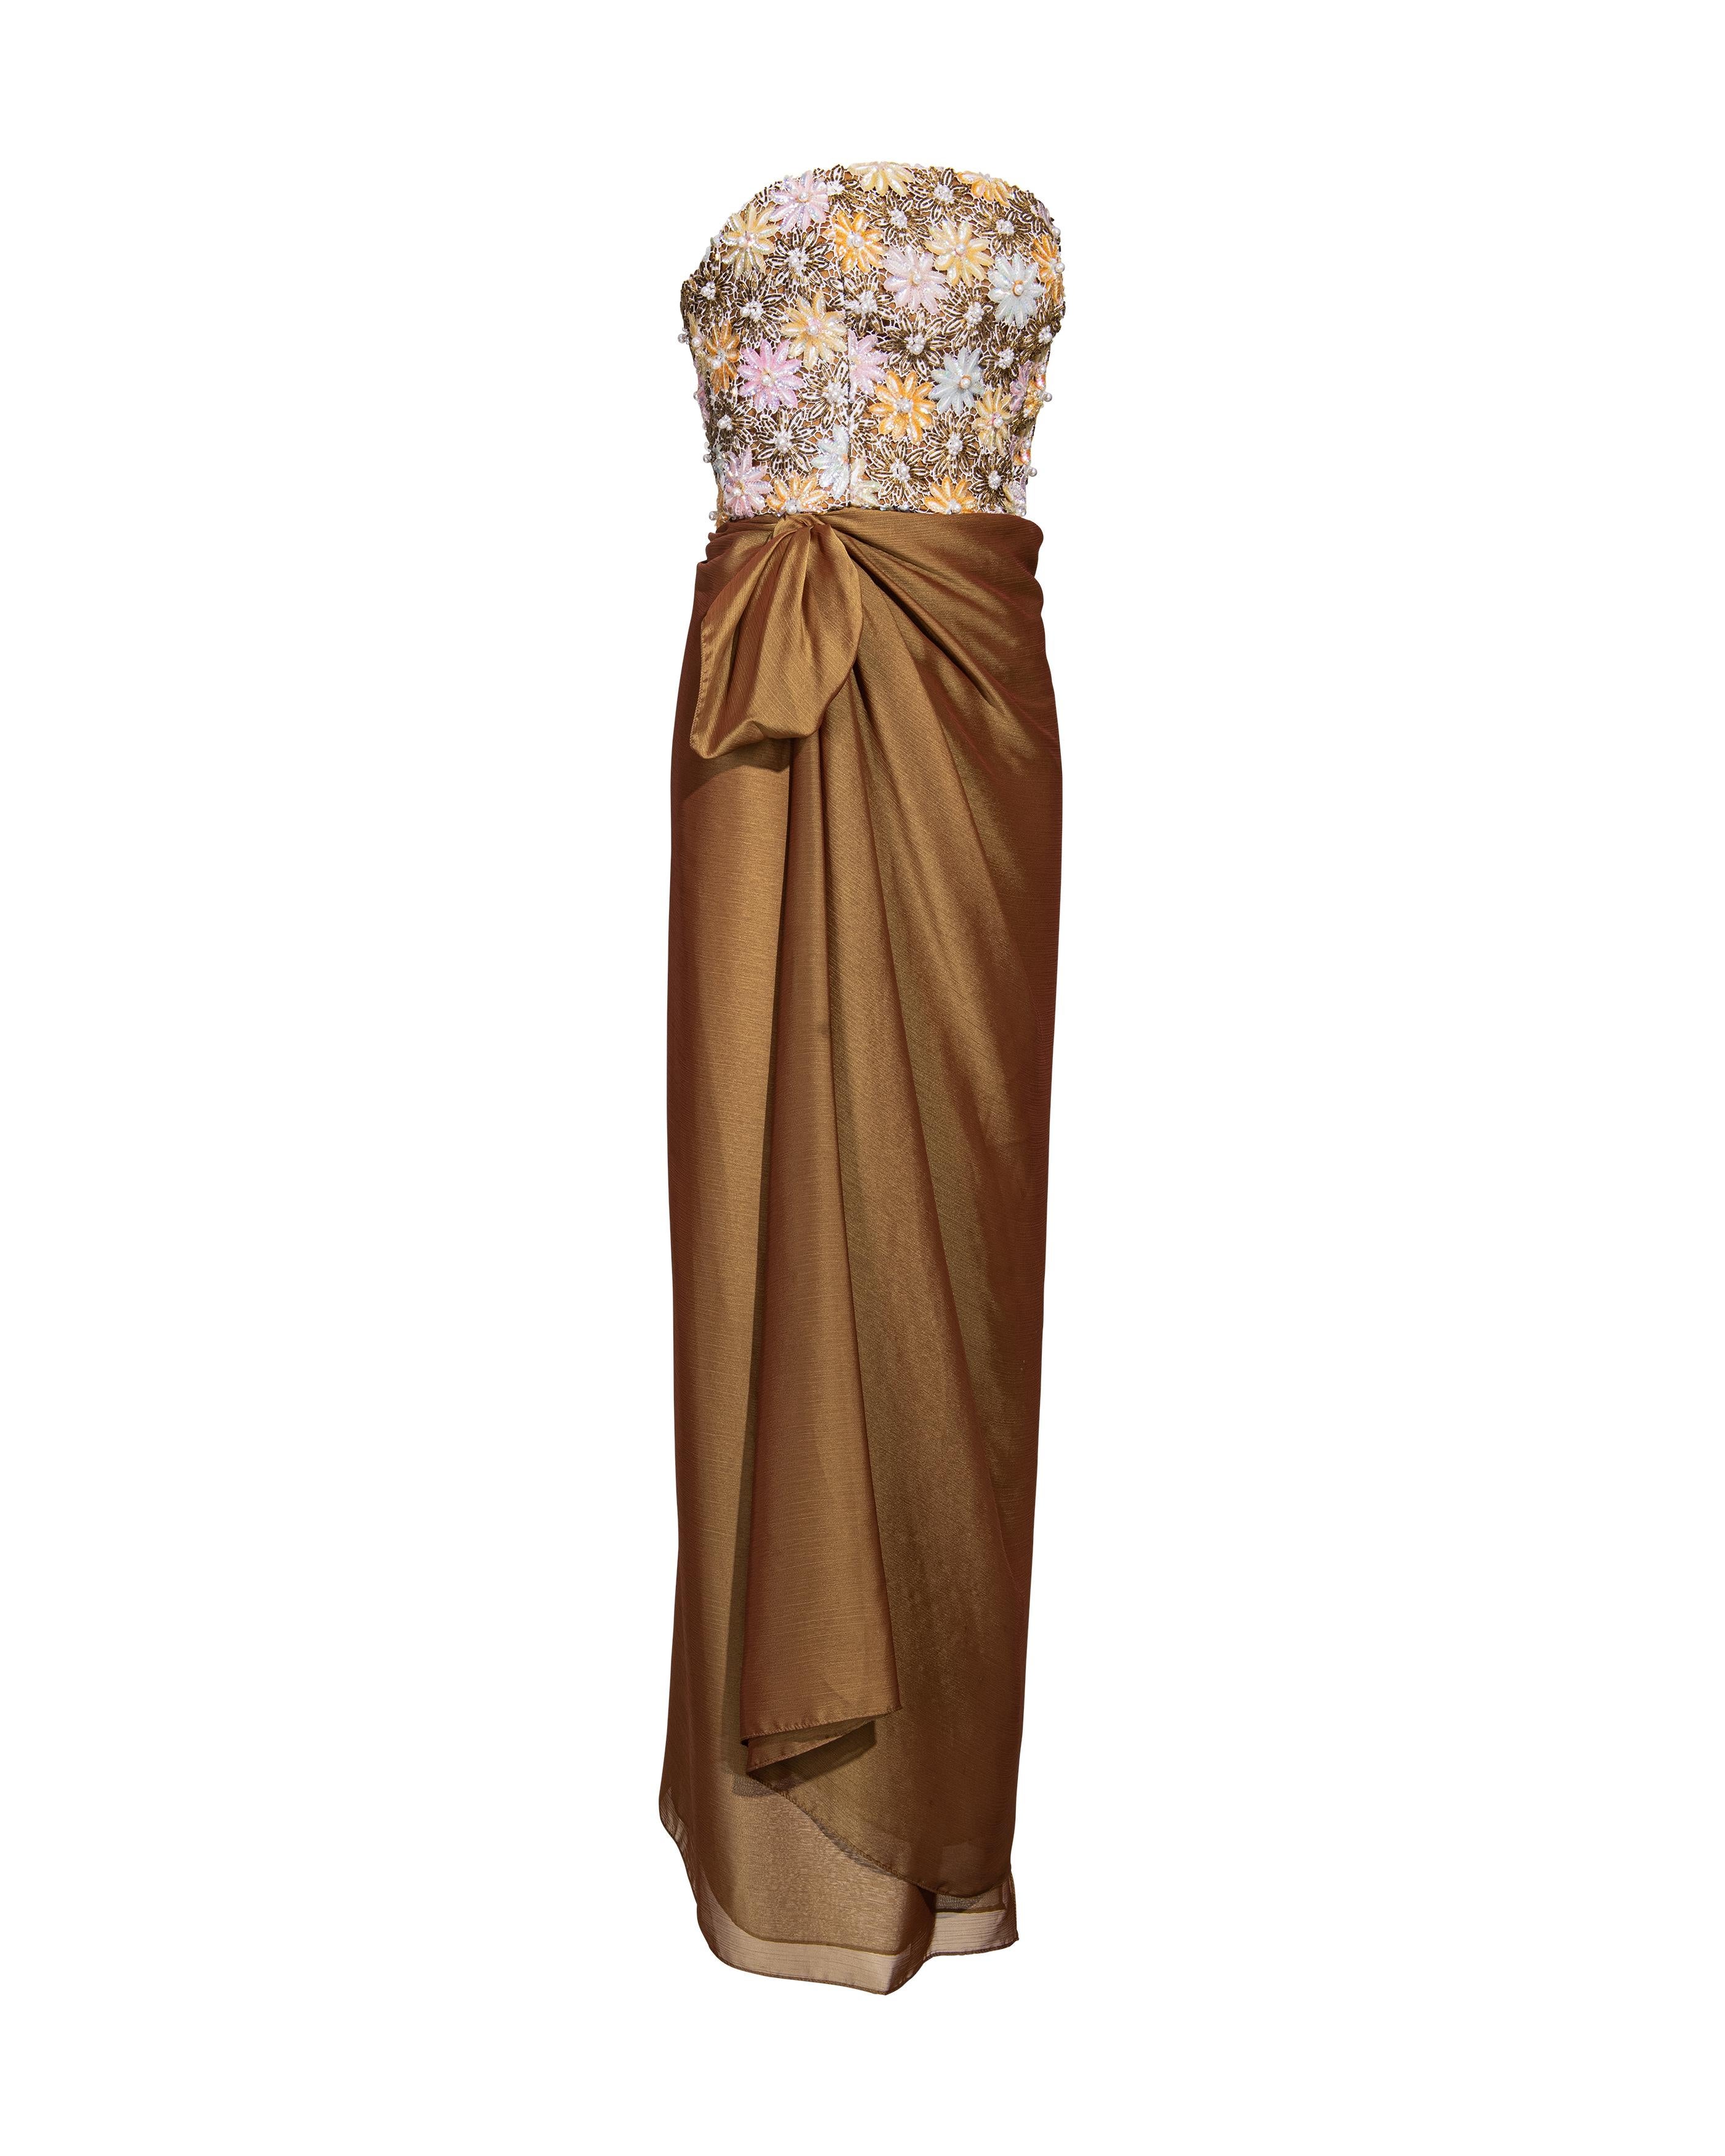 c. 1991 Nina Ricci Embellished Copper Strapless Gown with Stole 1